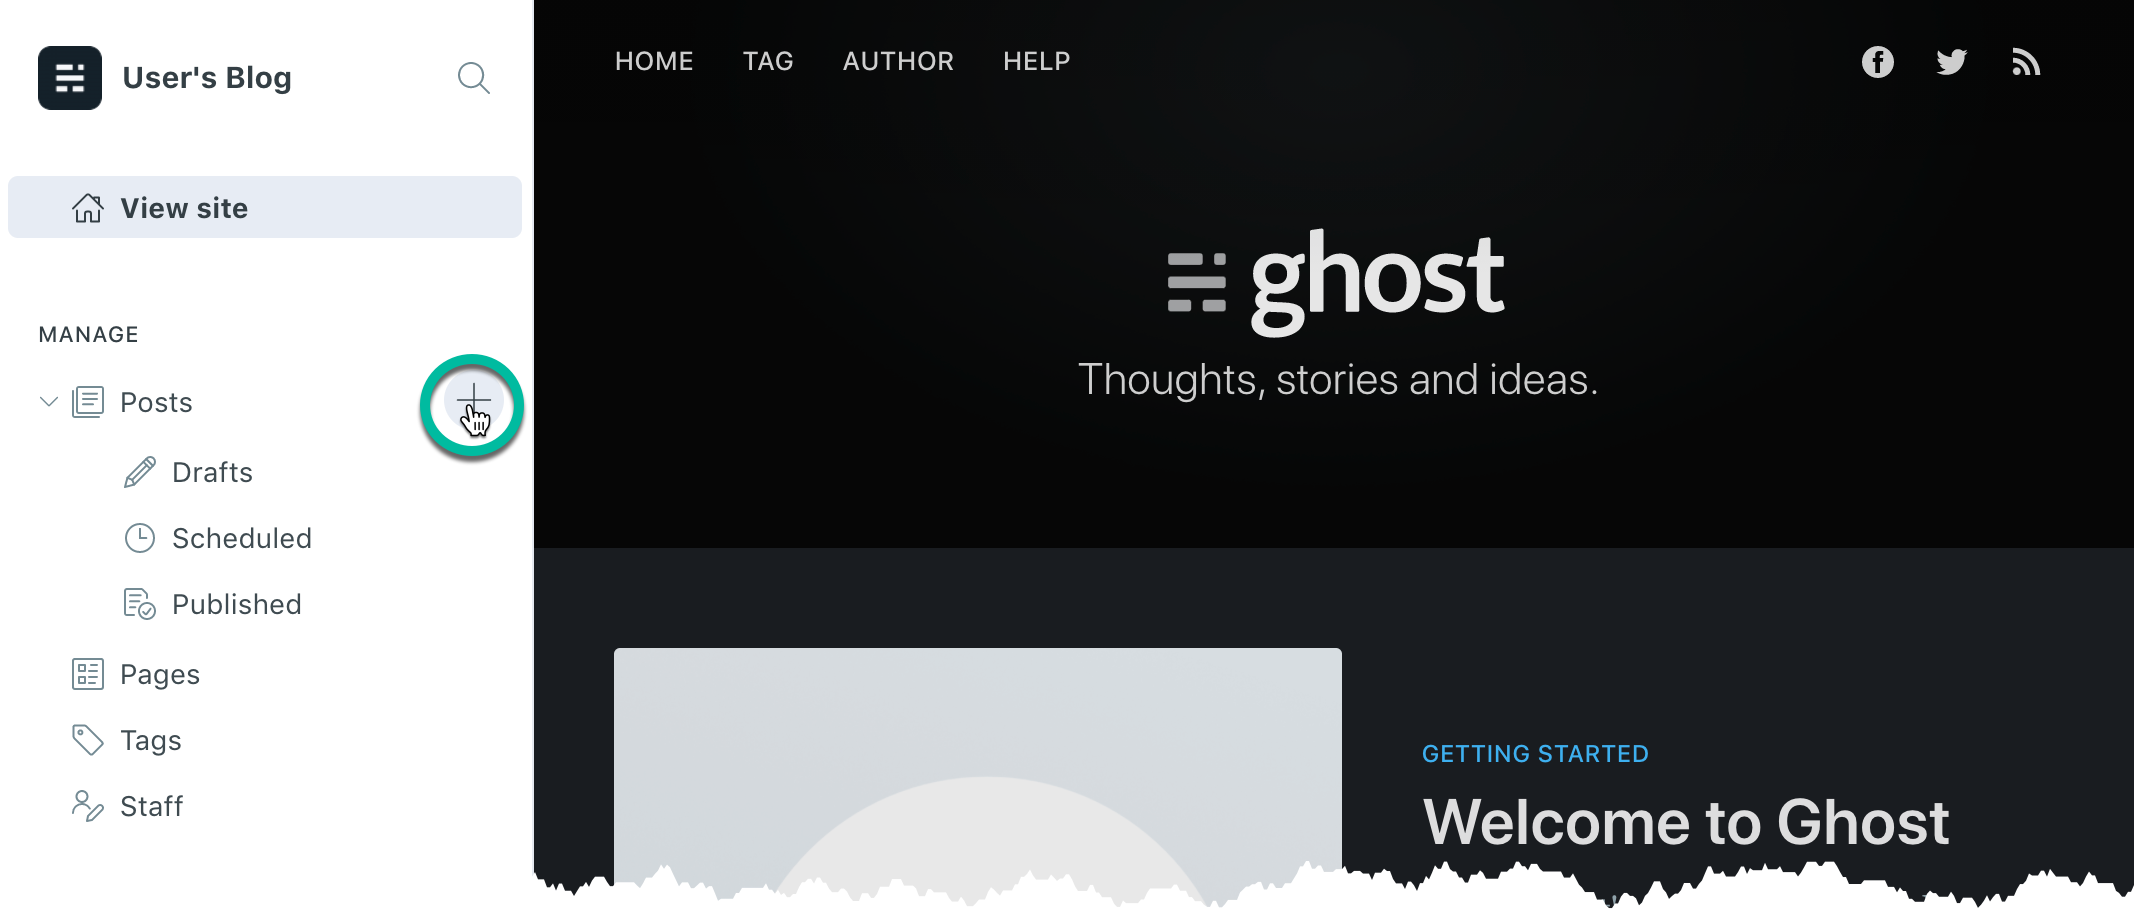 Ghost Admin Page